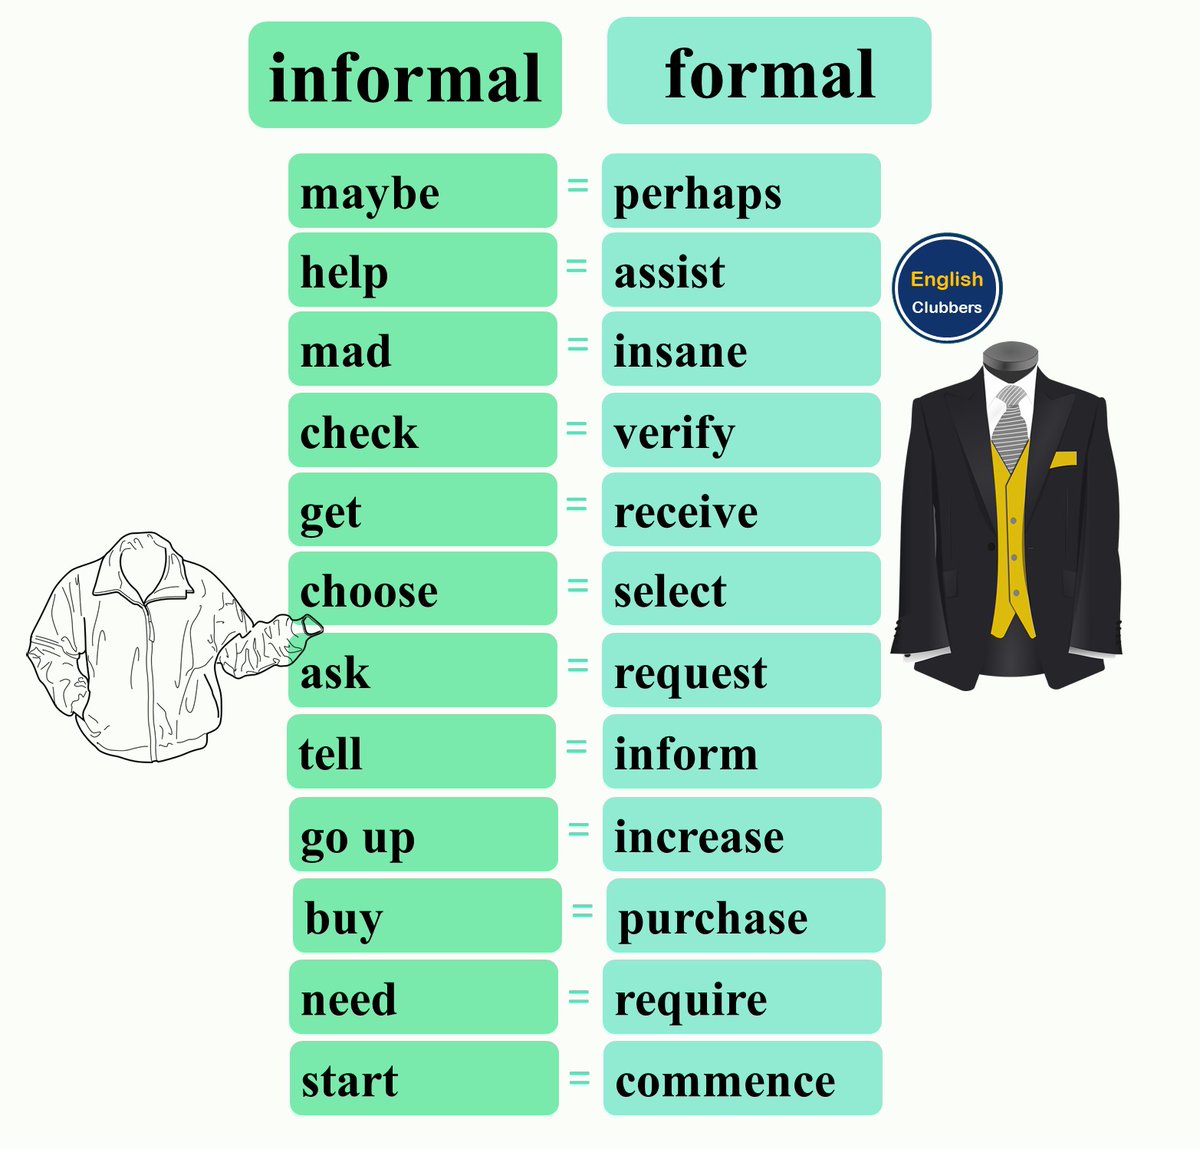 English Clubbers on Twitter: "Informal vs formal English words"